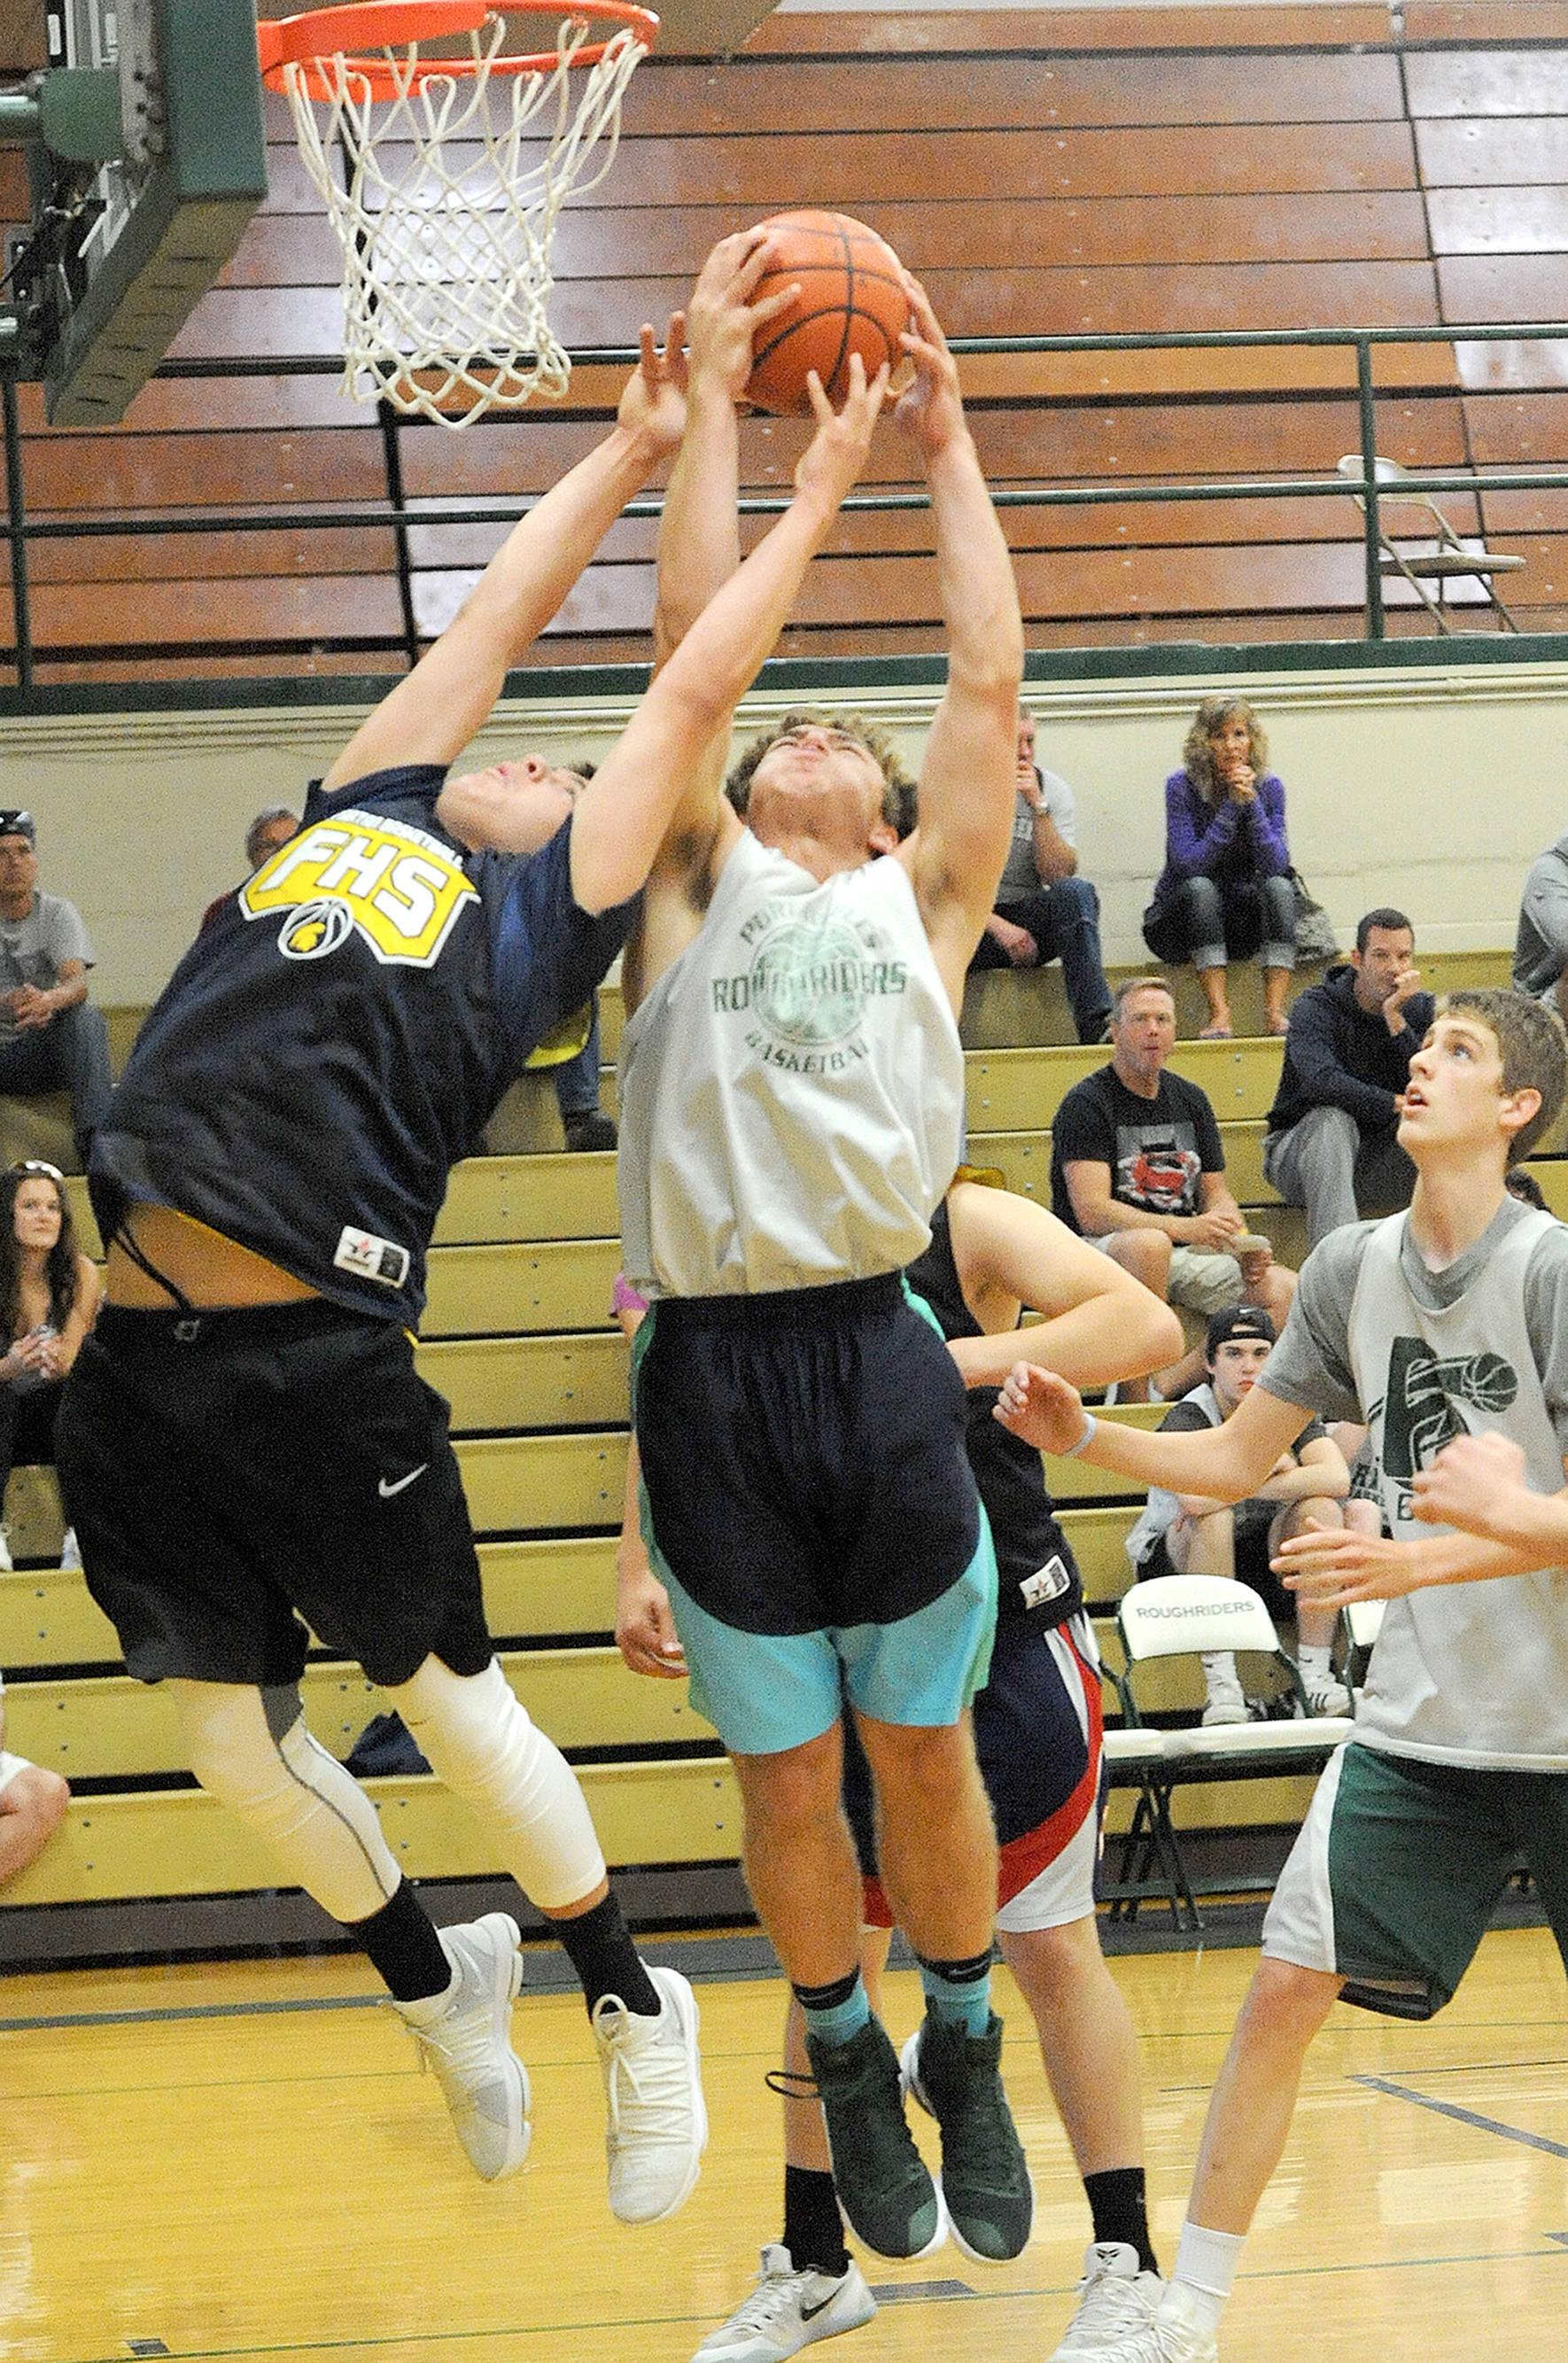 AREA SPORTS BRIEFS: 3-on-3 hoops tourney Saturday in Port Angeles; youth sports registration time